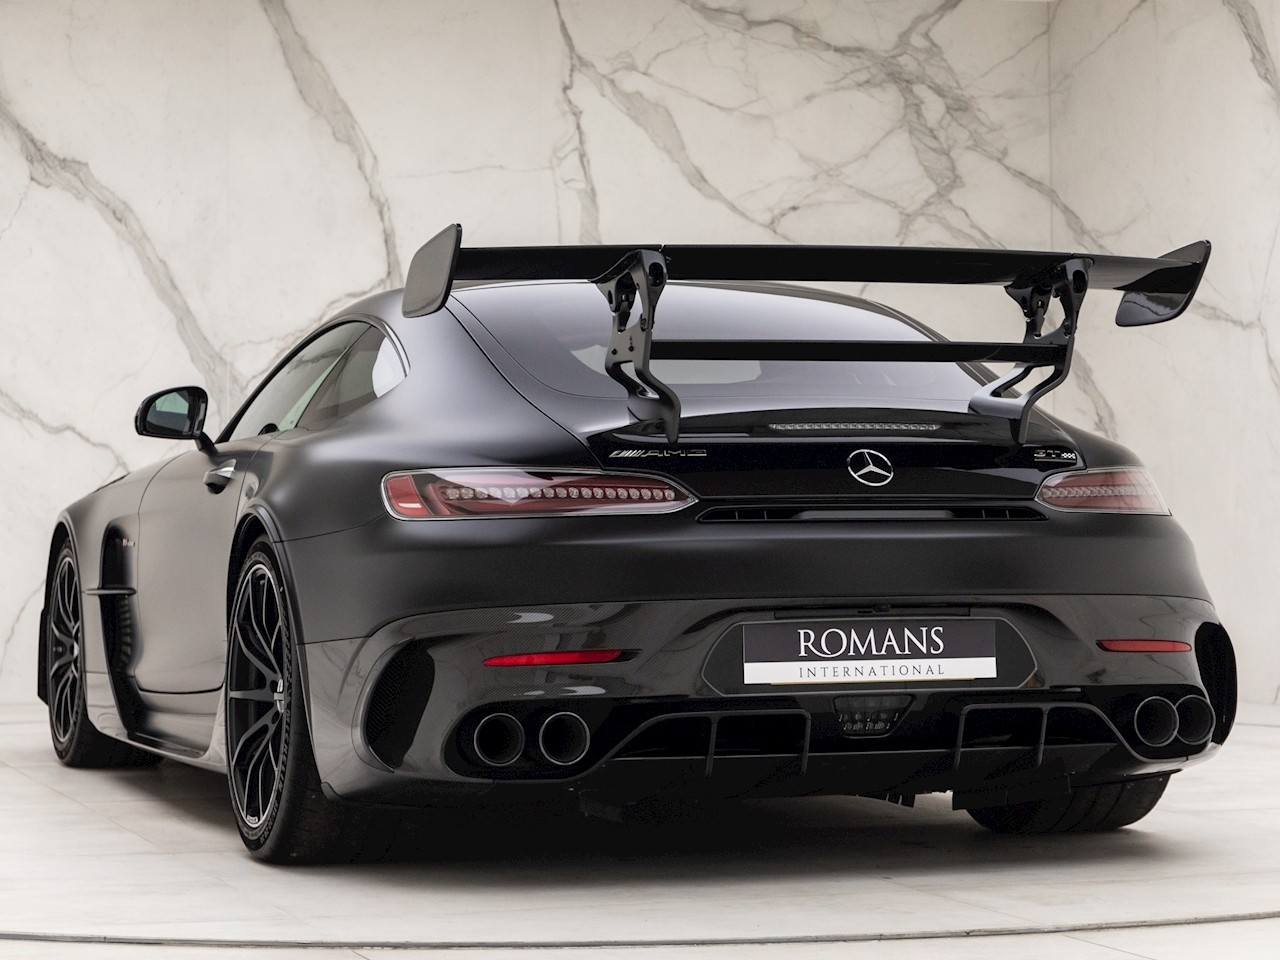 Used Mercedes-Benz Amg GT GT Black Series for sale | Obsidian 